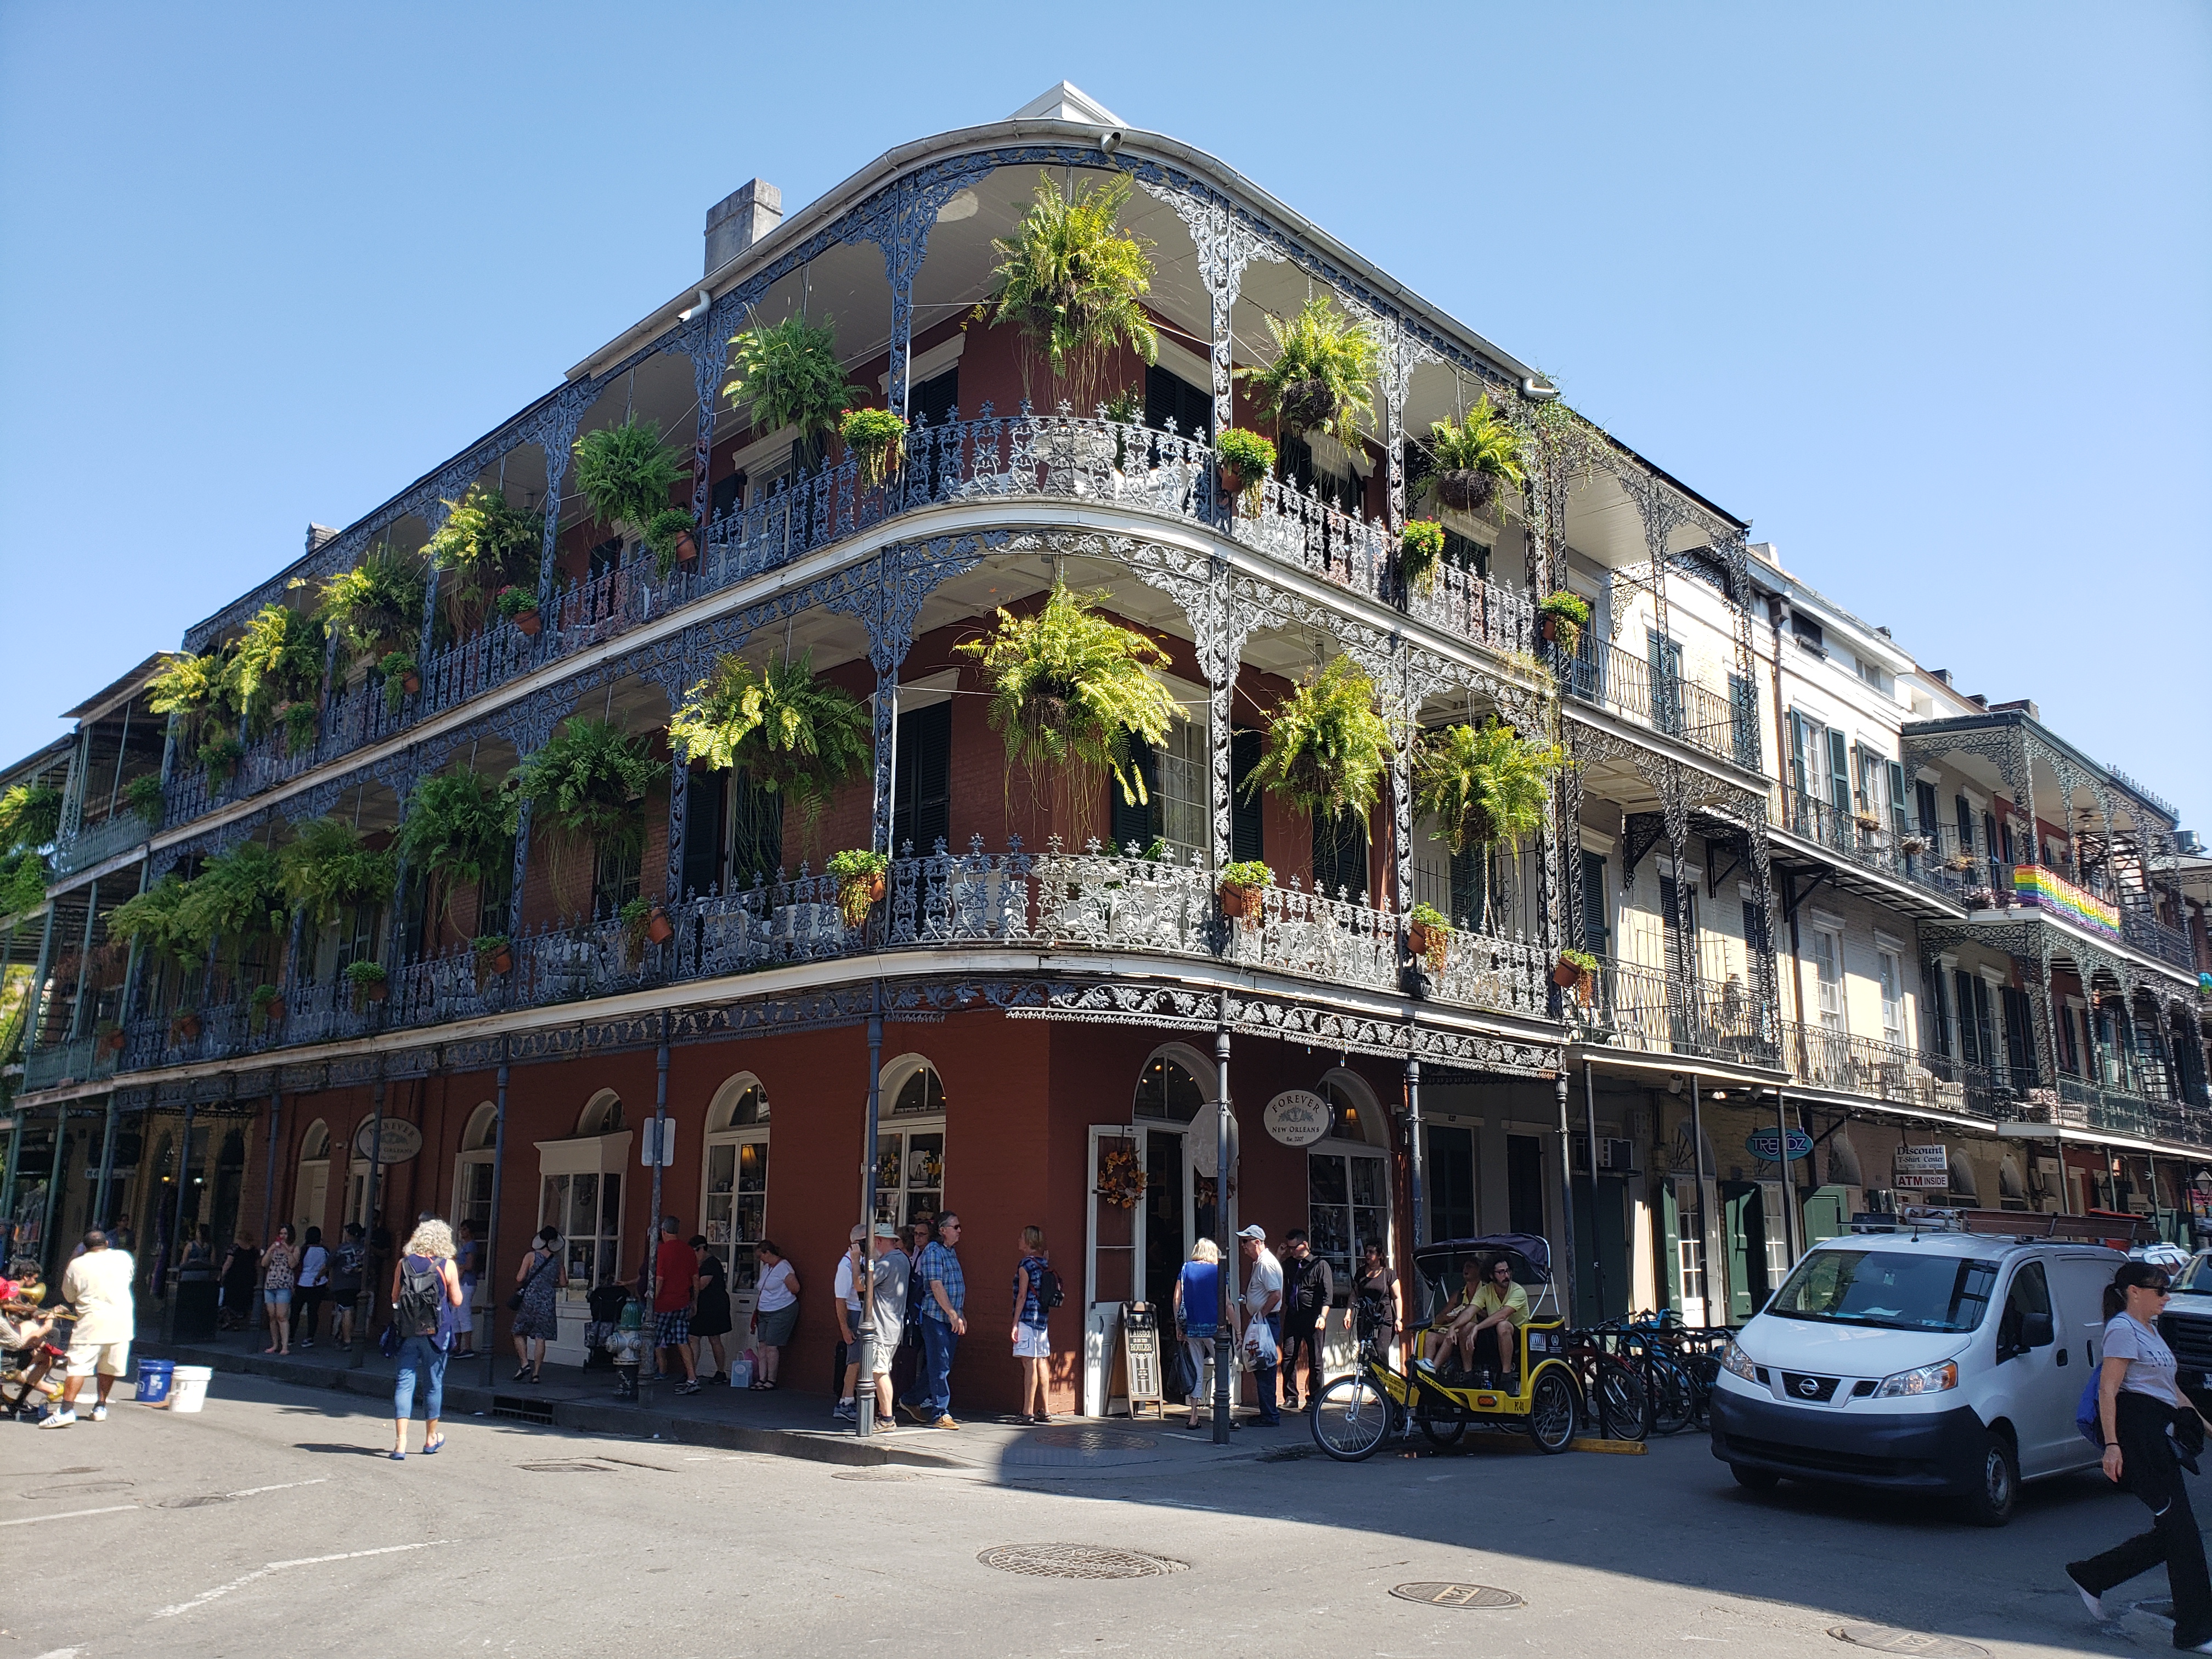 20191001 134456 - New Orleans: A Culinary Delight